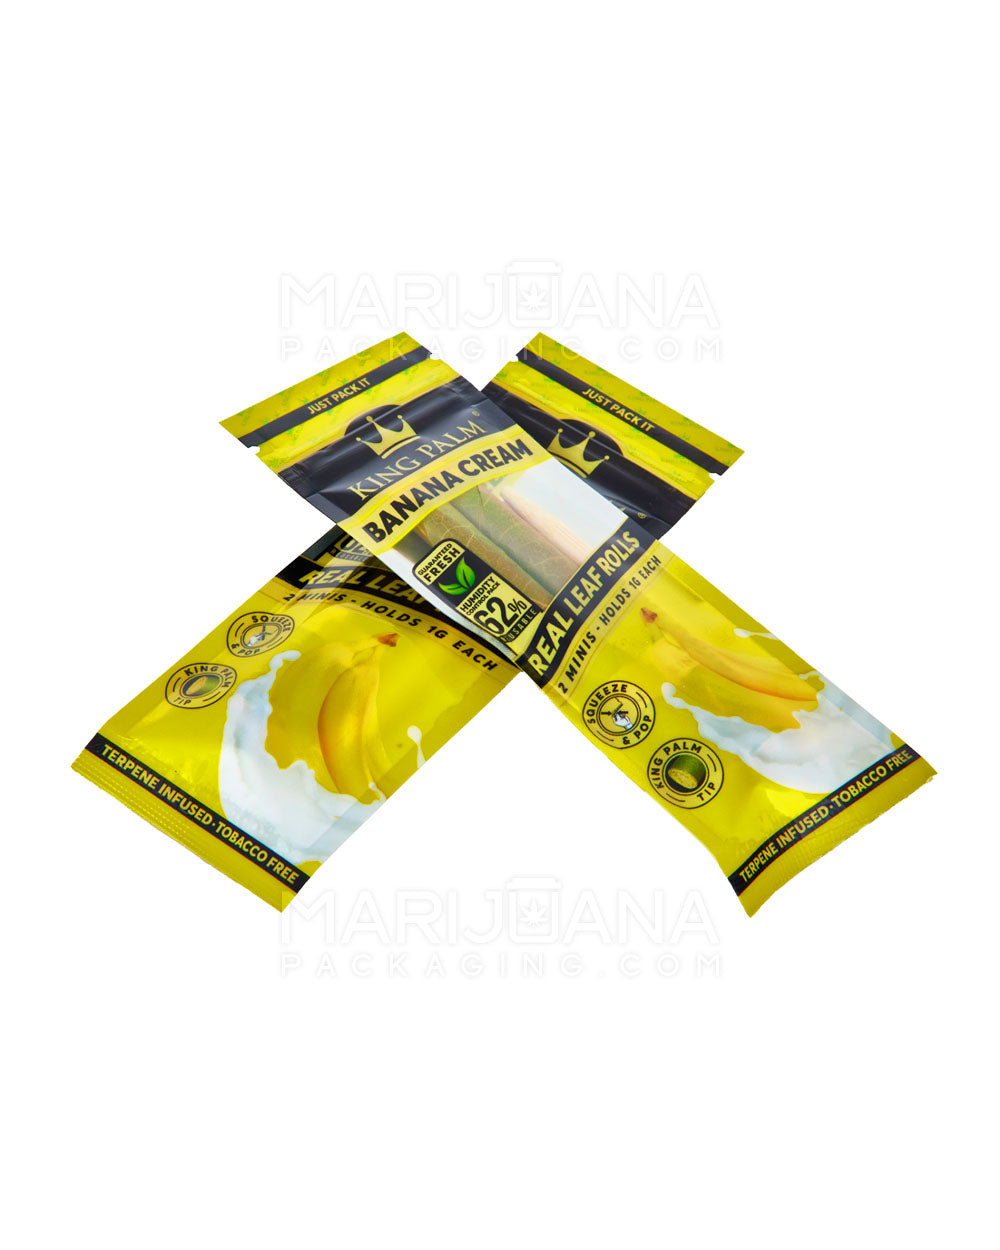 KING PALM | 'Retail Display' Natural Leaf Mini Rolls Blunt Wraps | 85mm - Banana Cream - 20 Count - 4